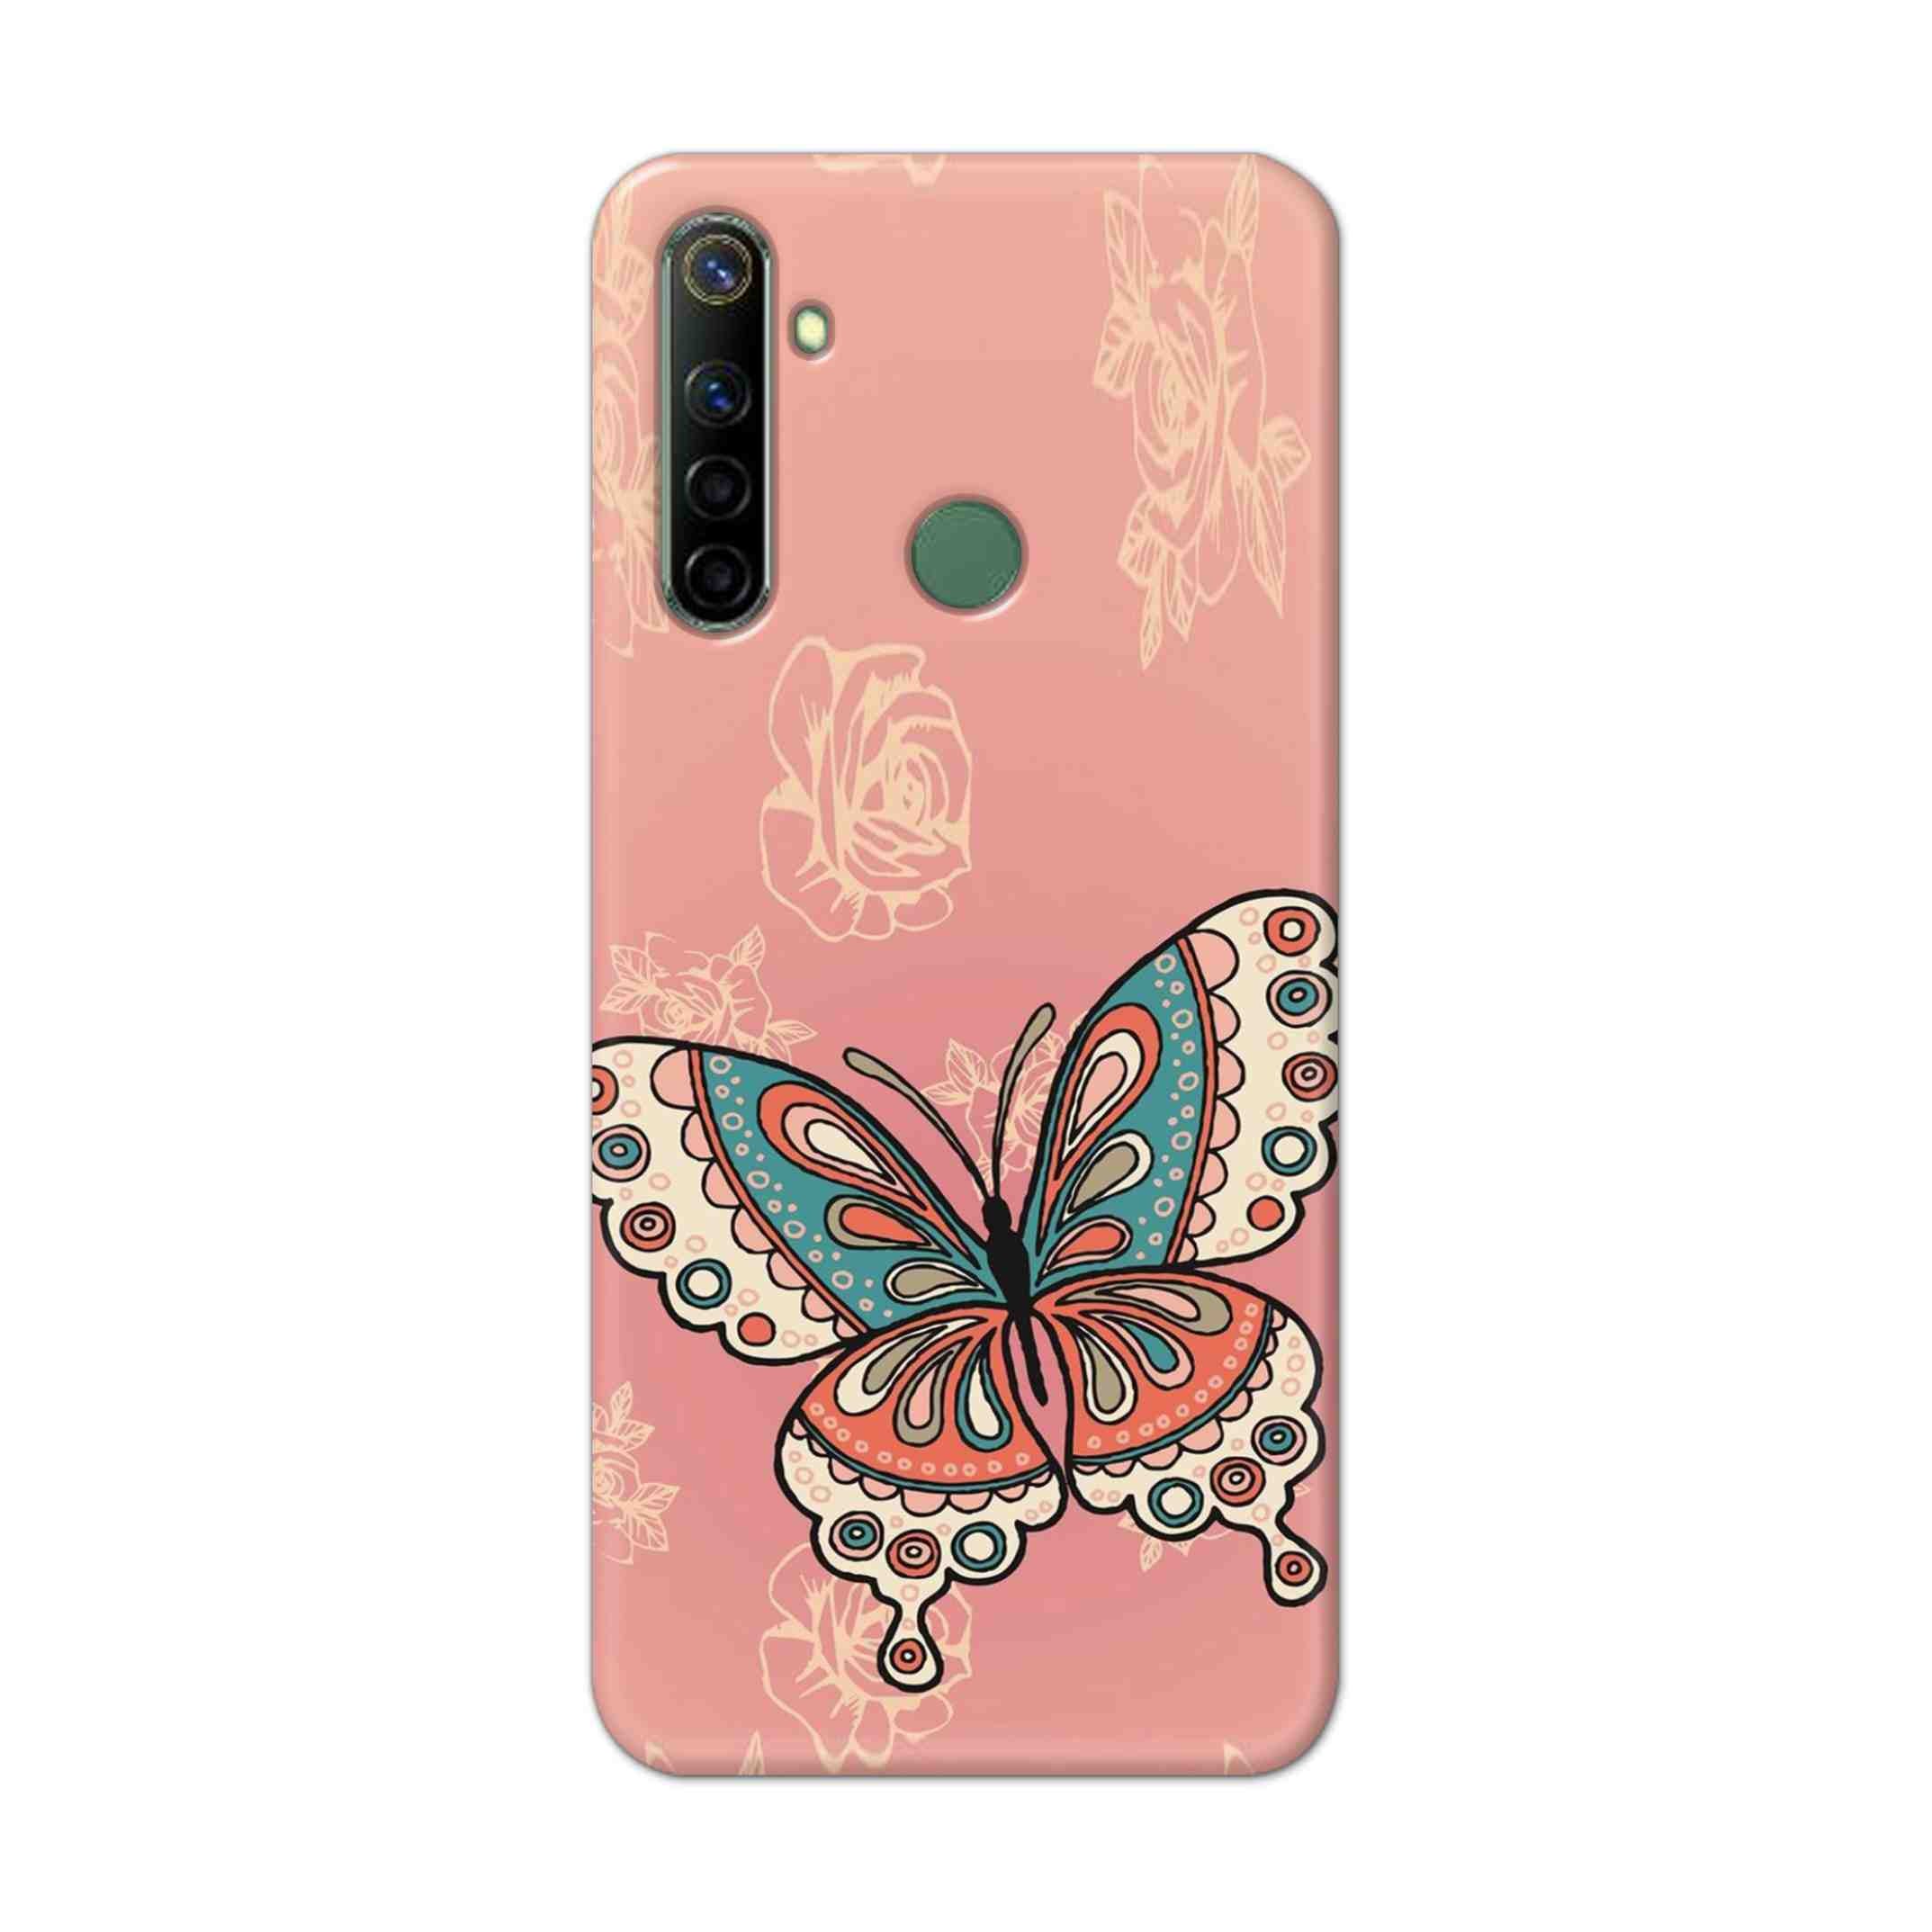 Buy Butterfly Hard Back Mobile Phone Case Cover For Realme Narzo 10a Online